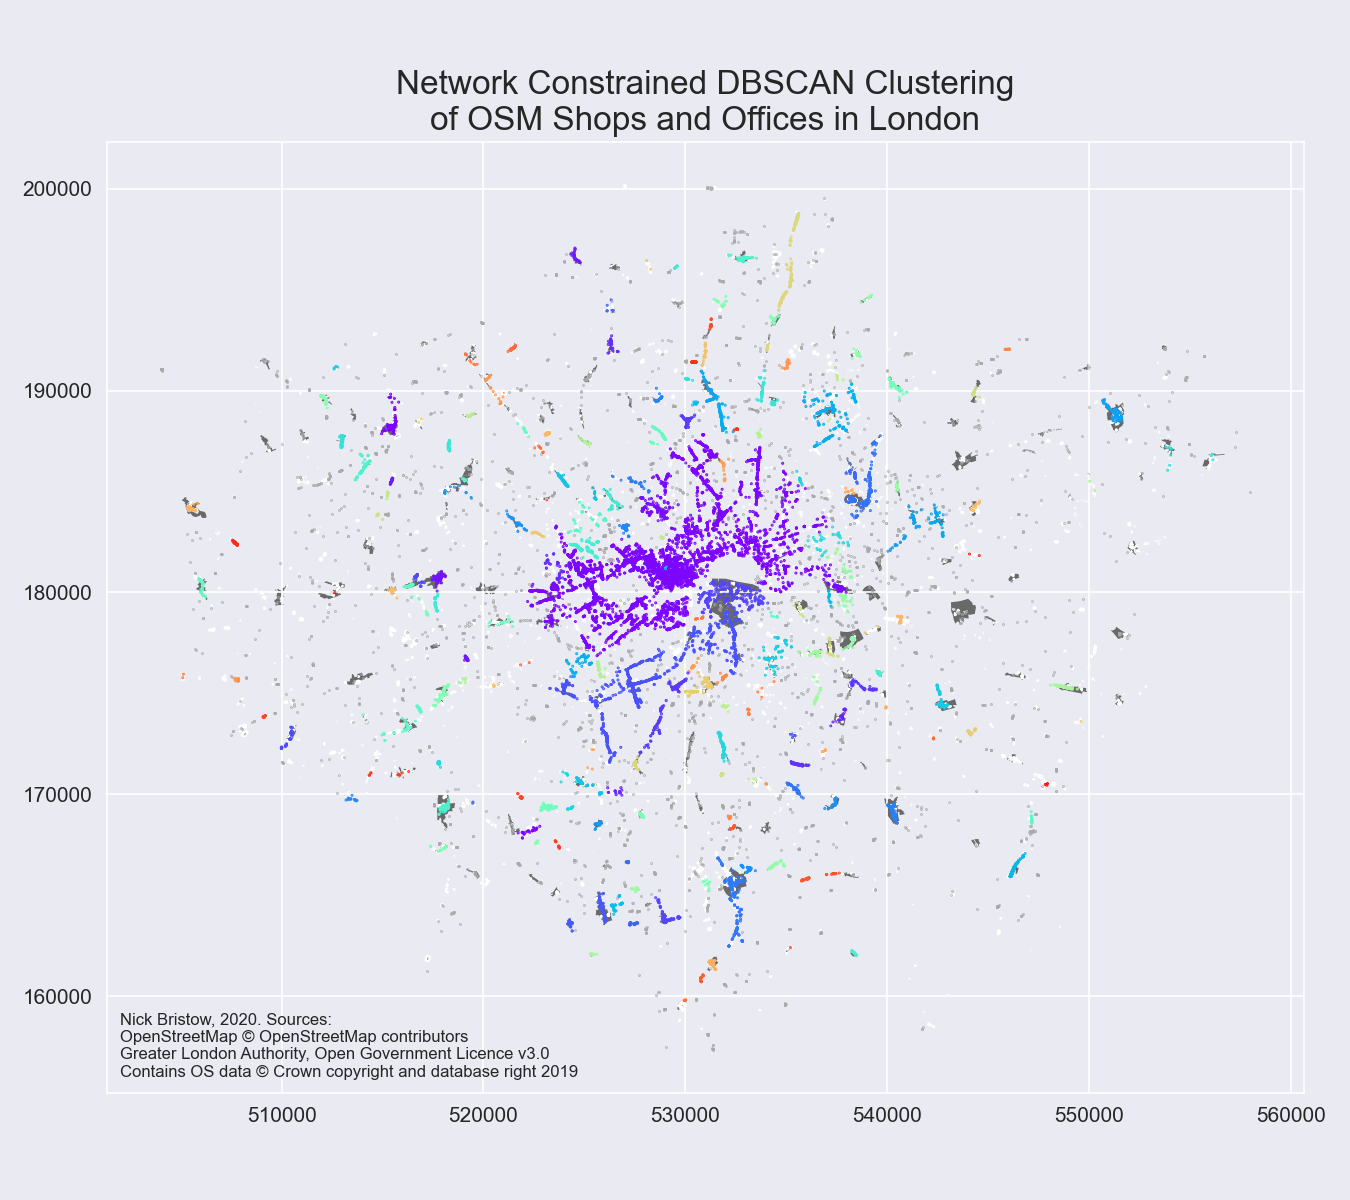 Network constrained clustering shops and offices in London